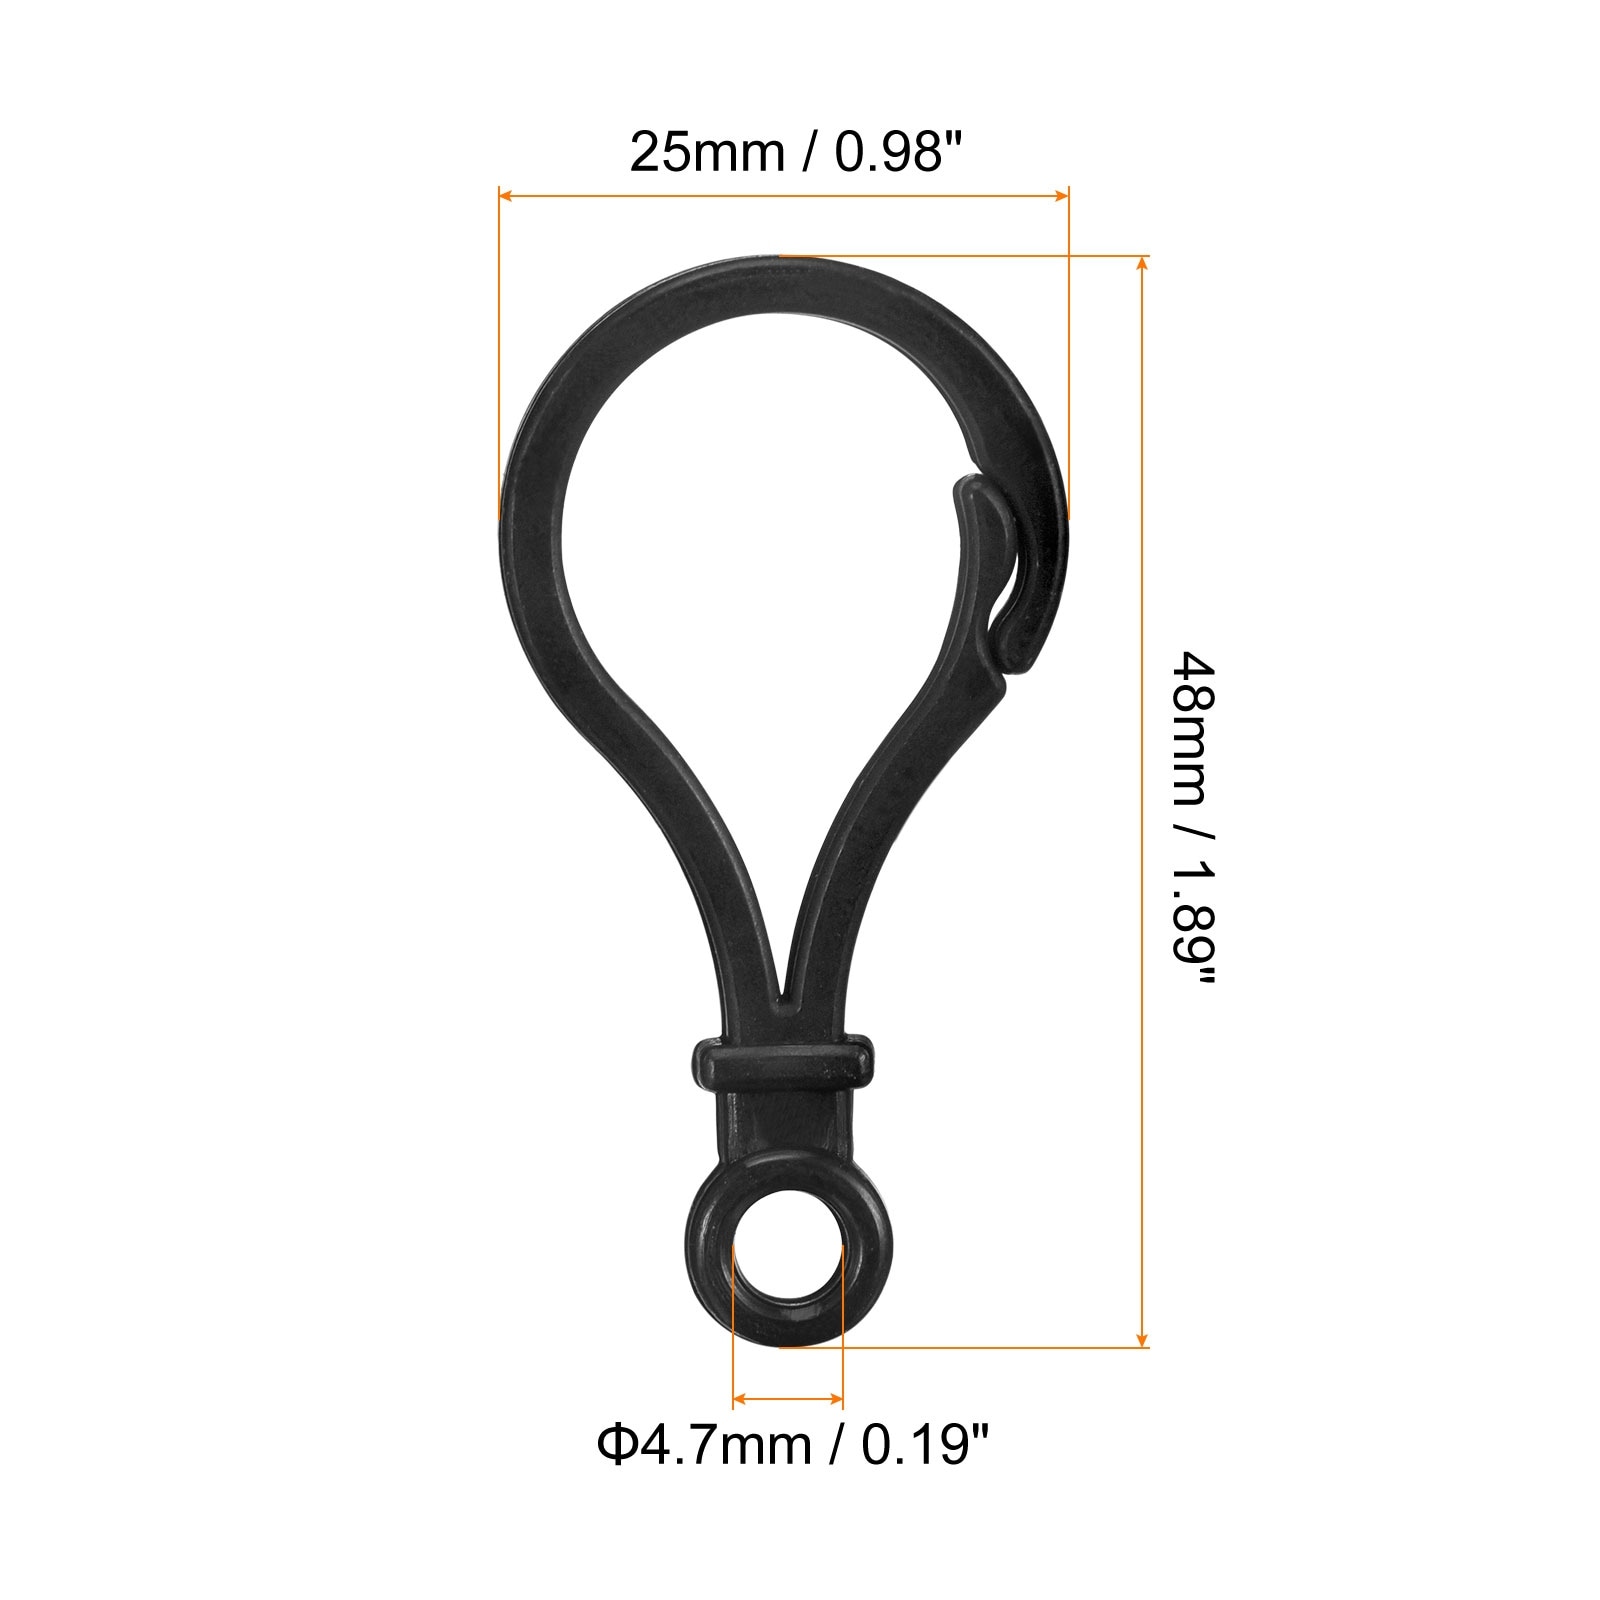 Plastic Lobster Clasps, Claw Snap Hooks for Keychains DIY Black 100Pcs -  50mm - Bed Bath & Beyond - 36886169